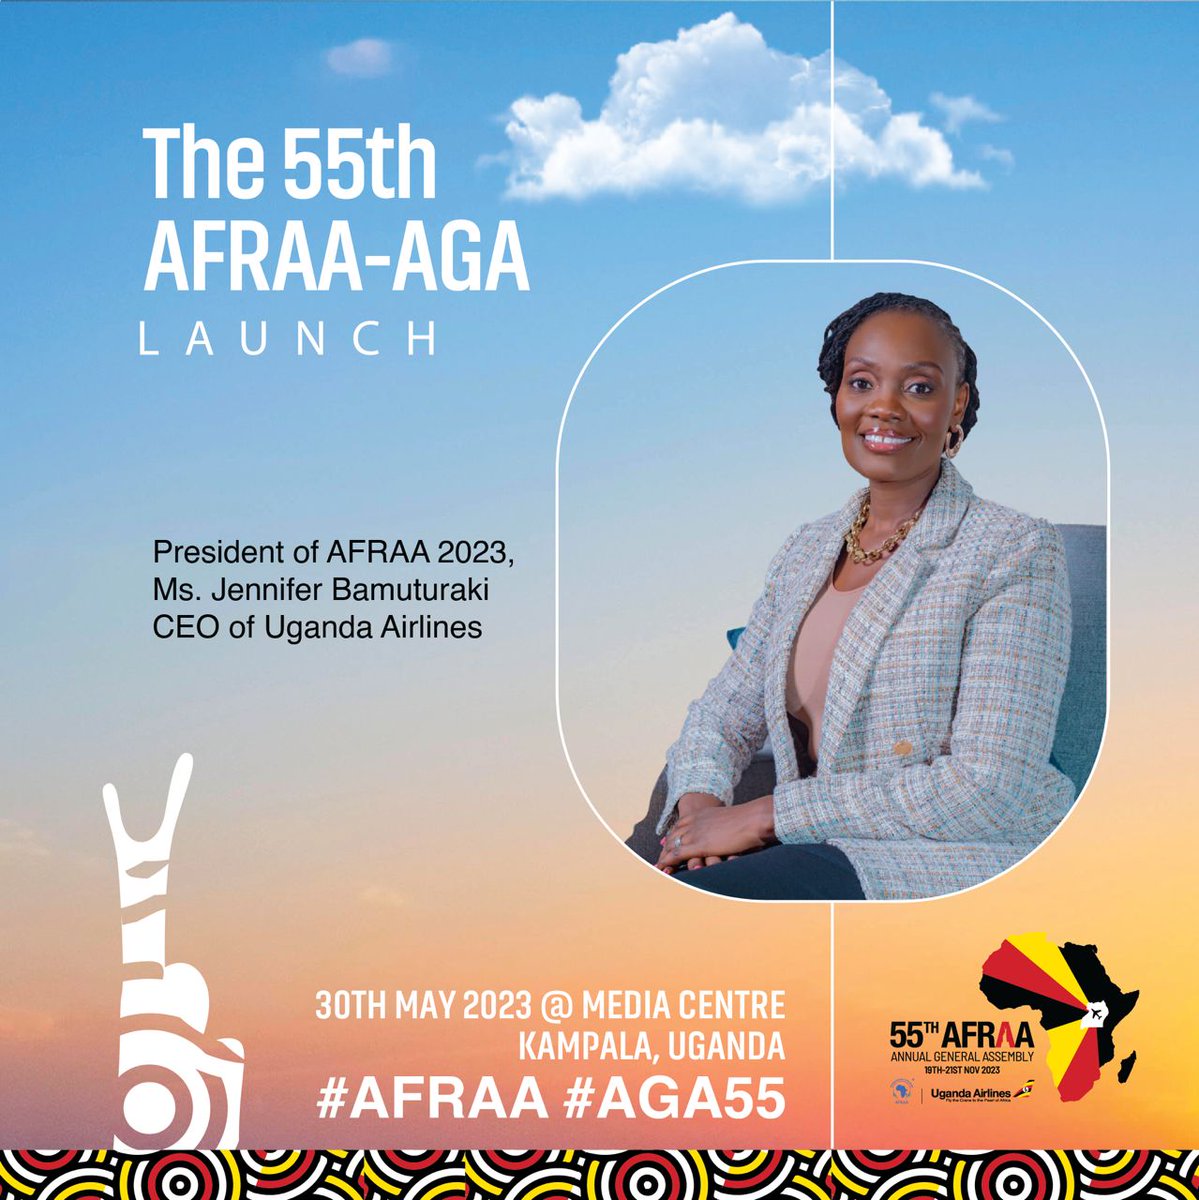 Ms. Jennifer Bamuturaki, the President of AFRAA 2023 and CEO of Uganda Airlines, will grace the 55th AFRAA Annual General Assembly. #AFRAA #55AGA